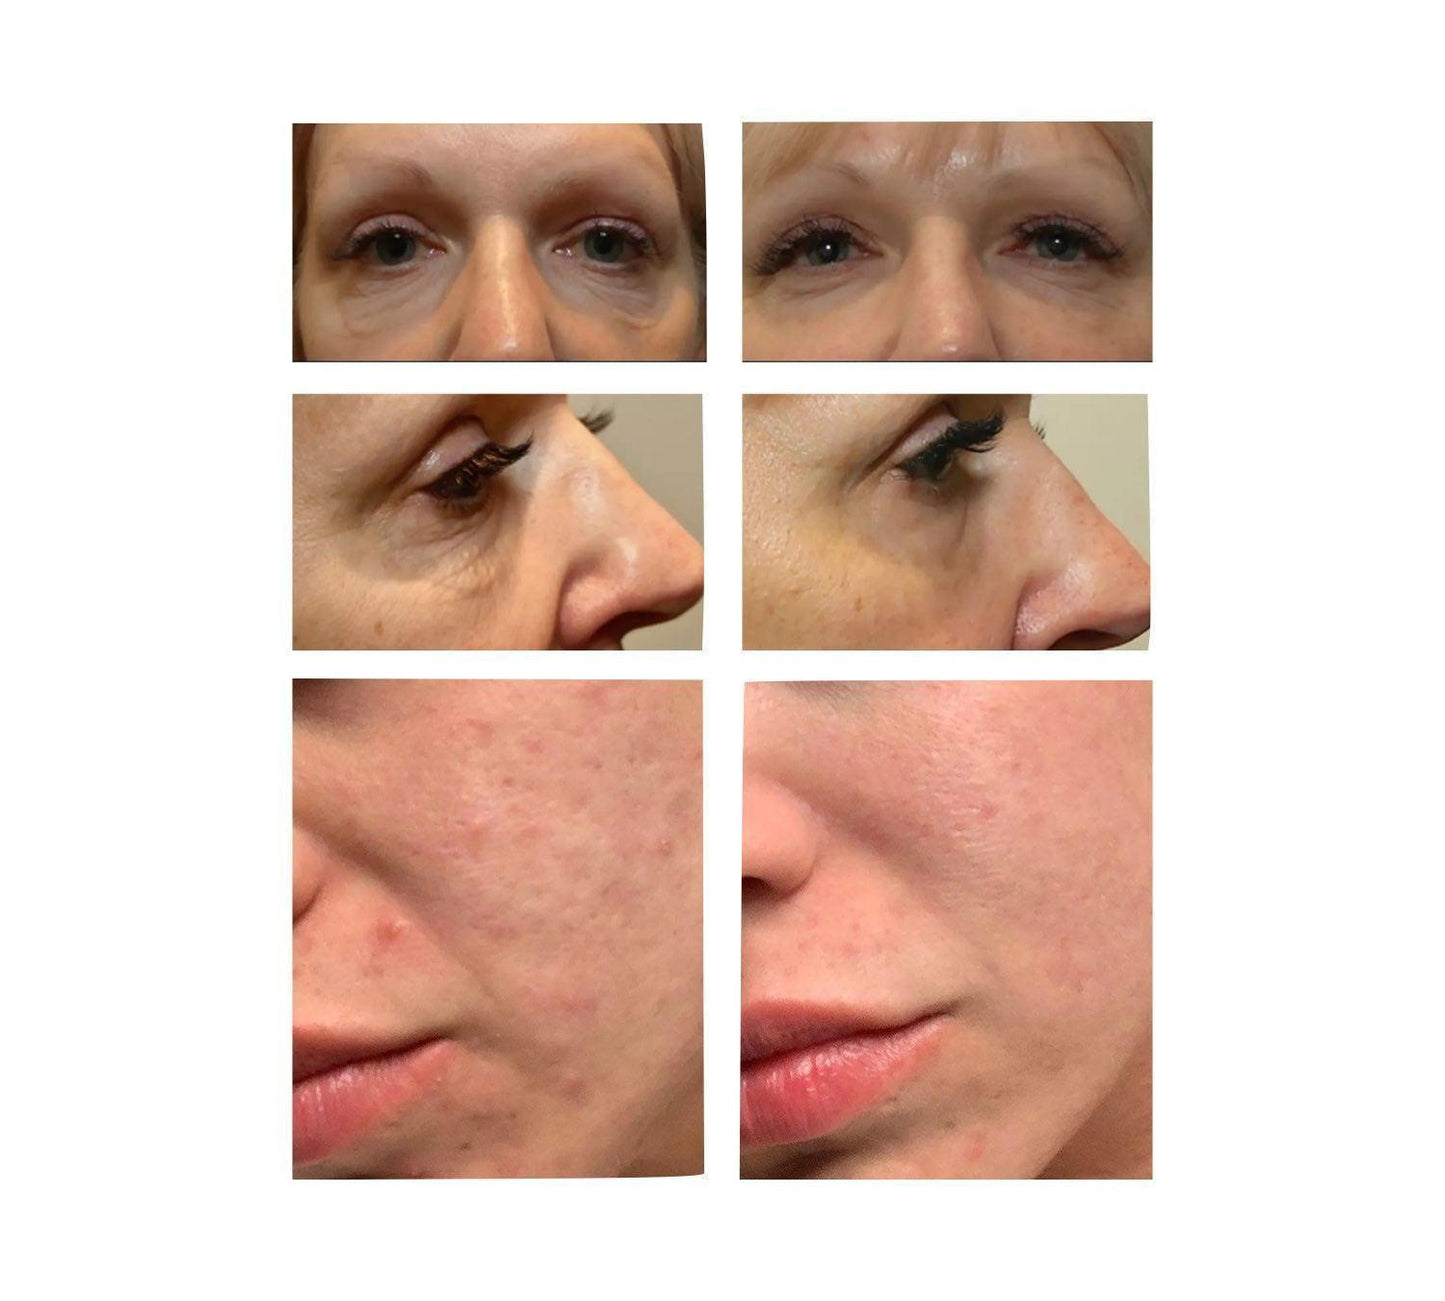 Load image into Gallery viewer, Morpheus 8 - Skin Tightening Treatment-thesaloncranleigh
